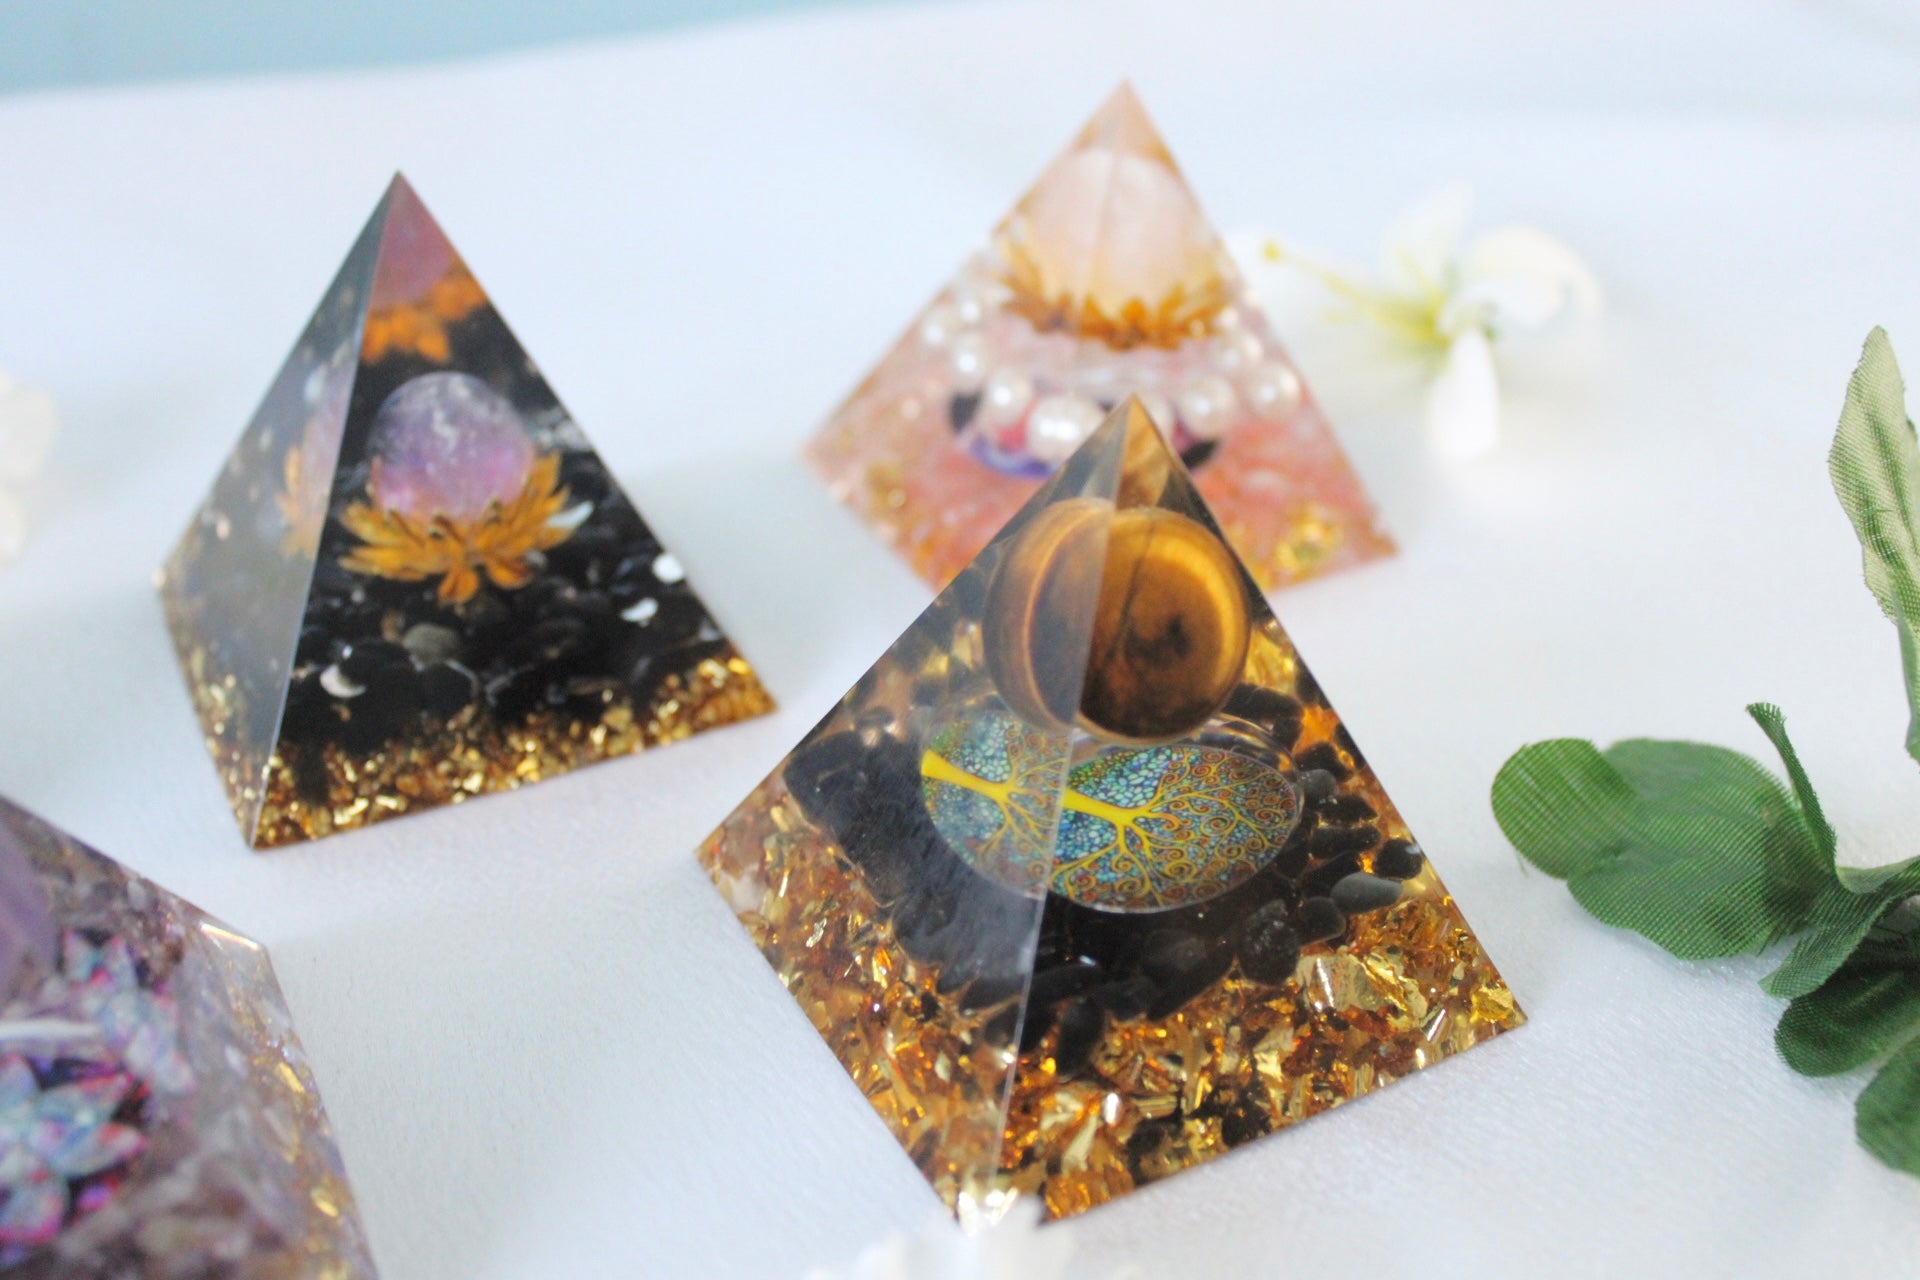 Layered with Sphere Orgonite Pyramid